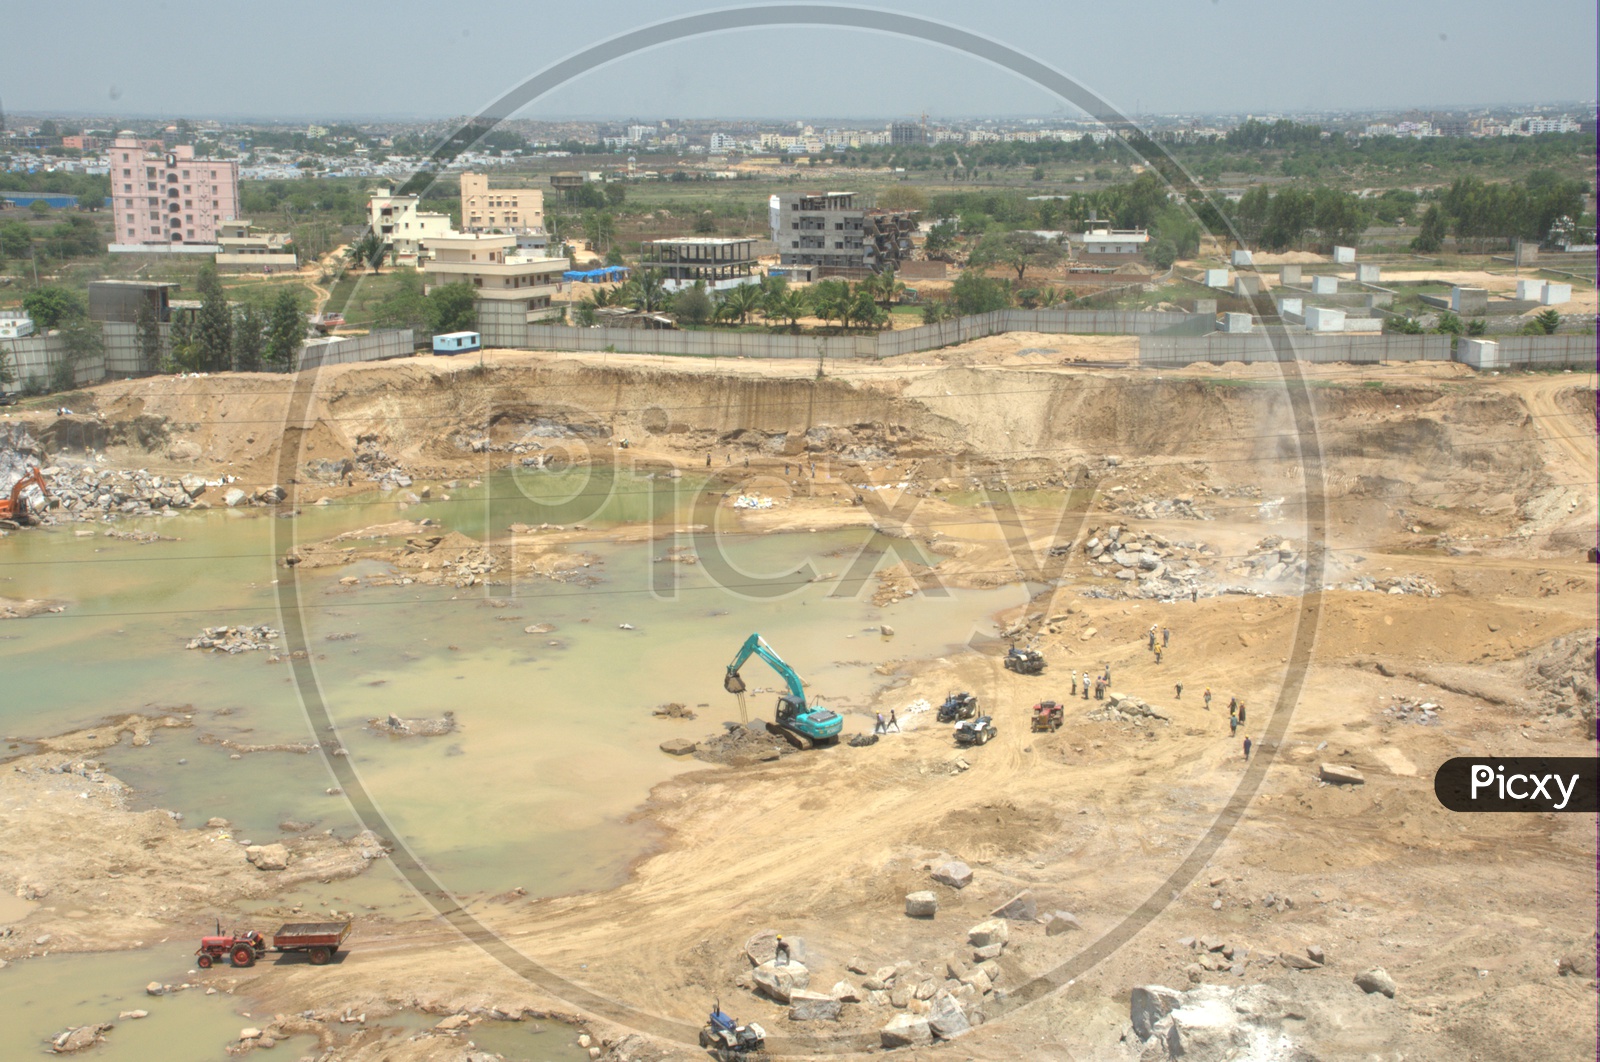 Aerial view of Bulldozer excavating the rock bodies alongside the labourers drilling at a construction site